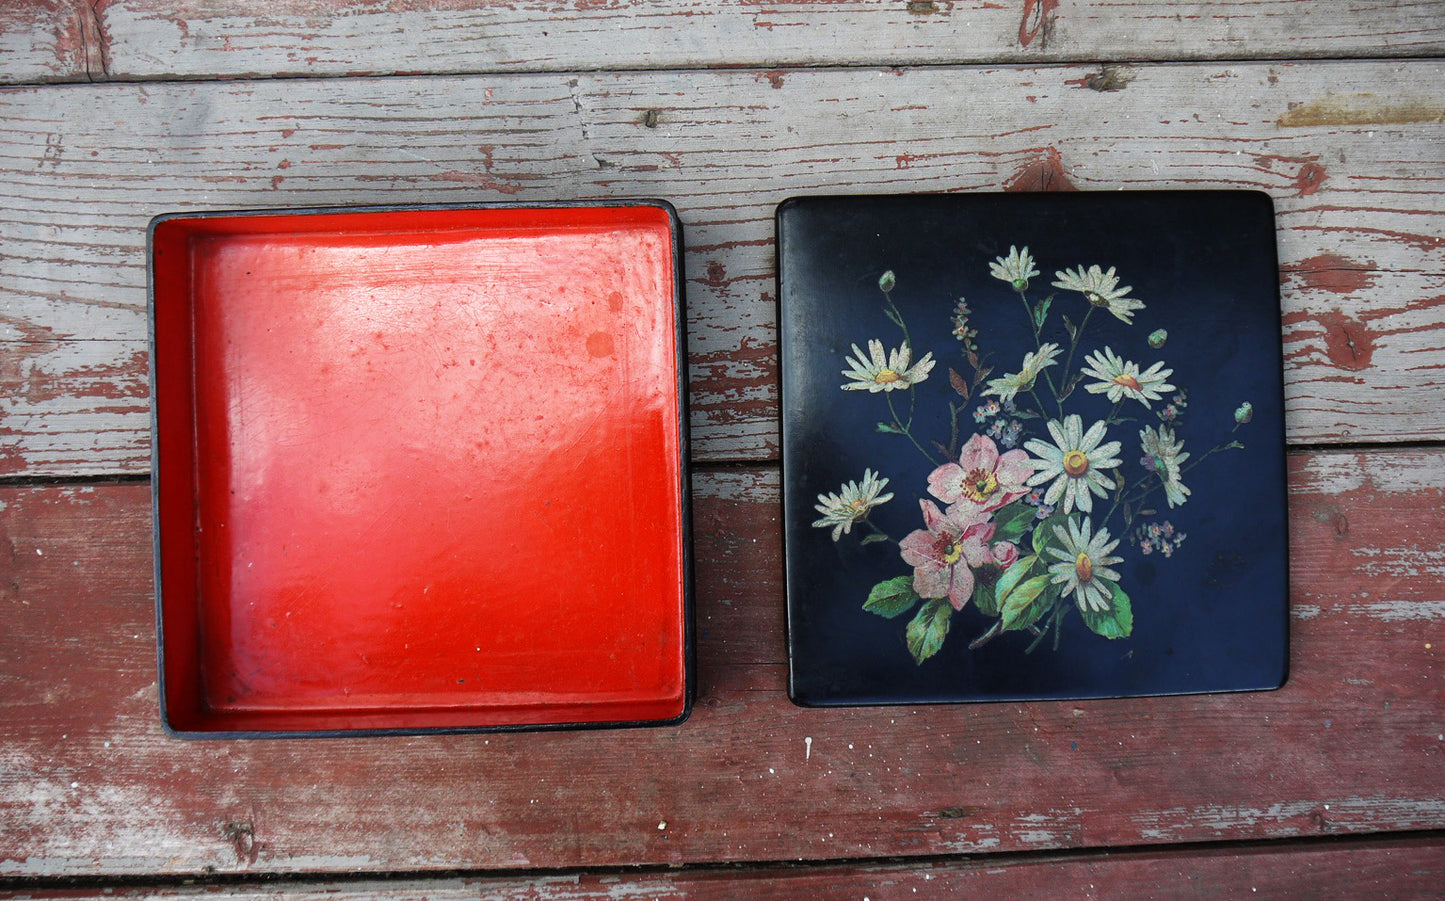 Vintage square floral wooden box in black and red wth traditional decoupaged flowers on the lid